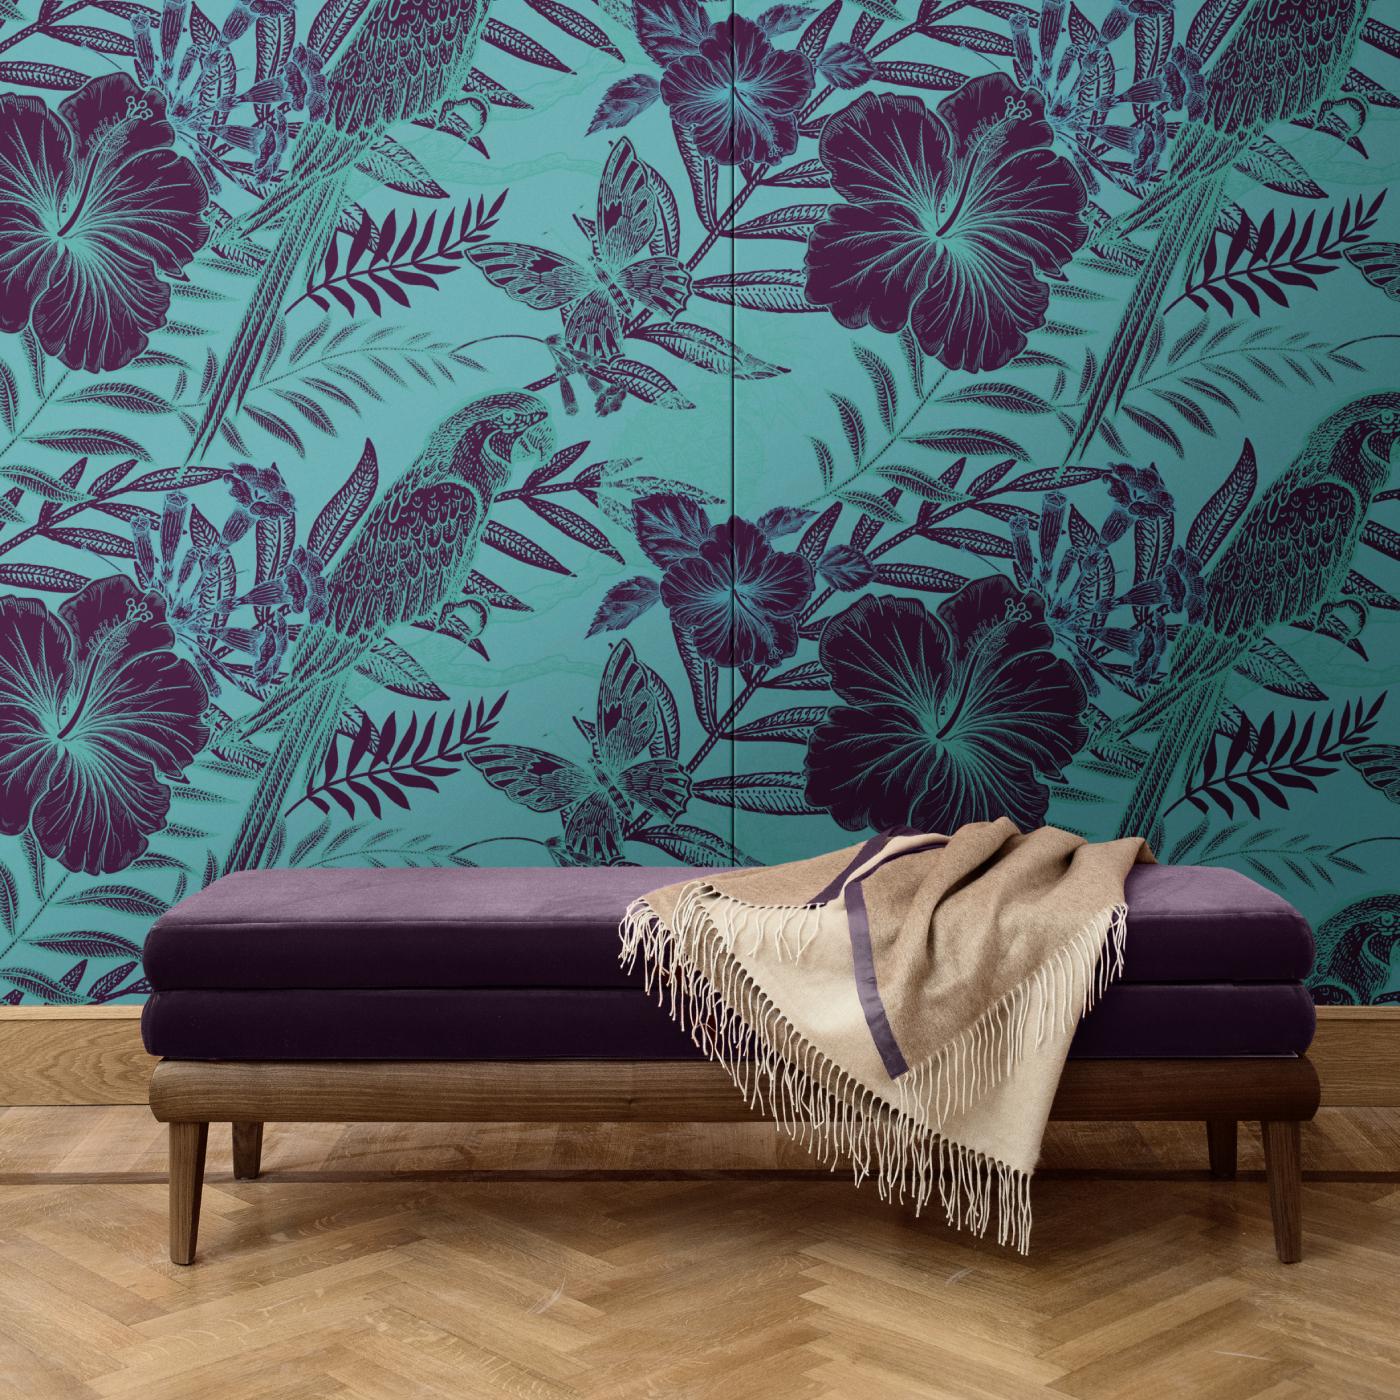 This elegant wall covering depicts a mesmerizing scene depicted as a negative photograph of an exotic scene with black parrots, hibiscus flowers, and butterflies over a green background. Part of the Parrots collection, this dramatic decoration will